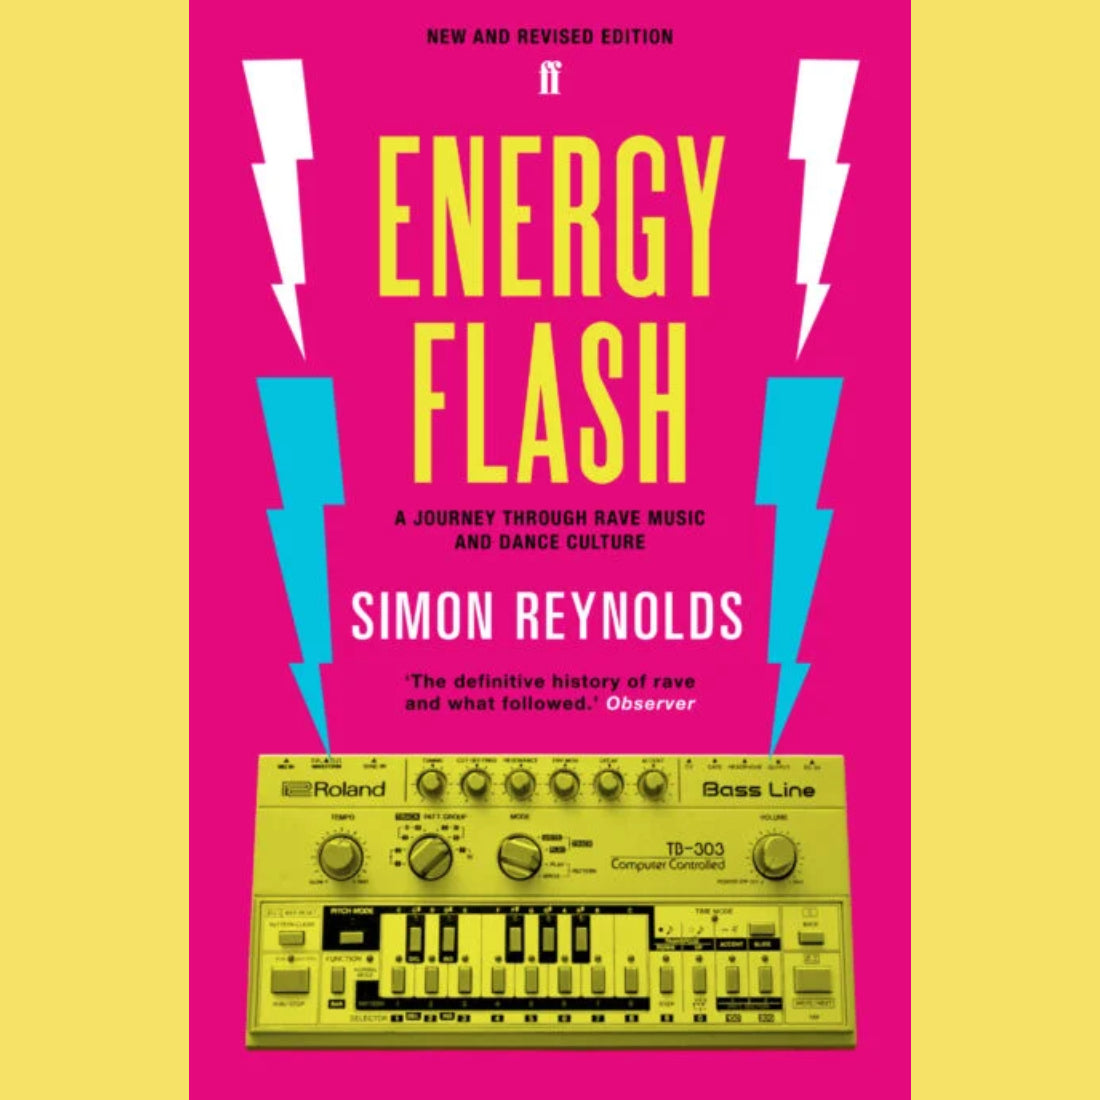 Simon Reynolds - Energy Flash | Buy the book from Flying Nun Records